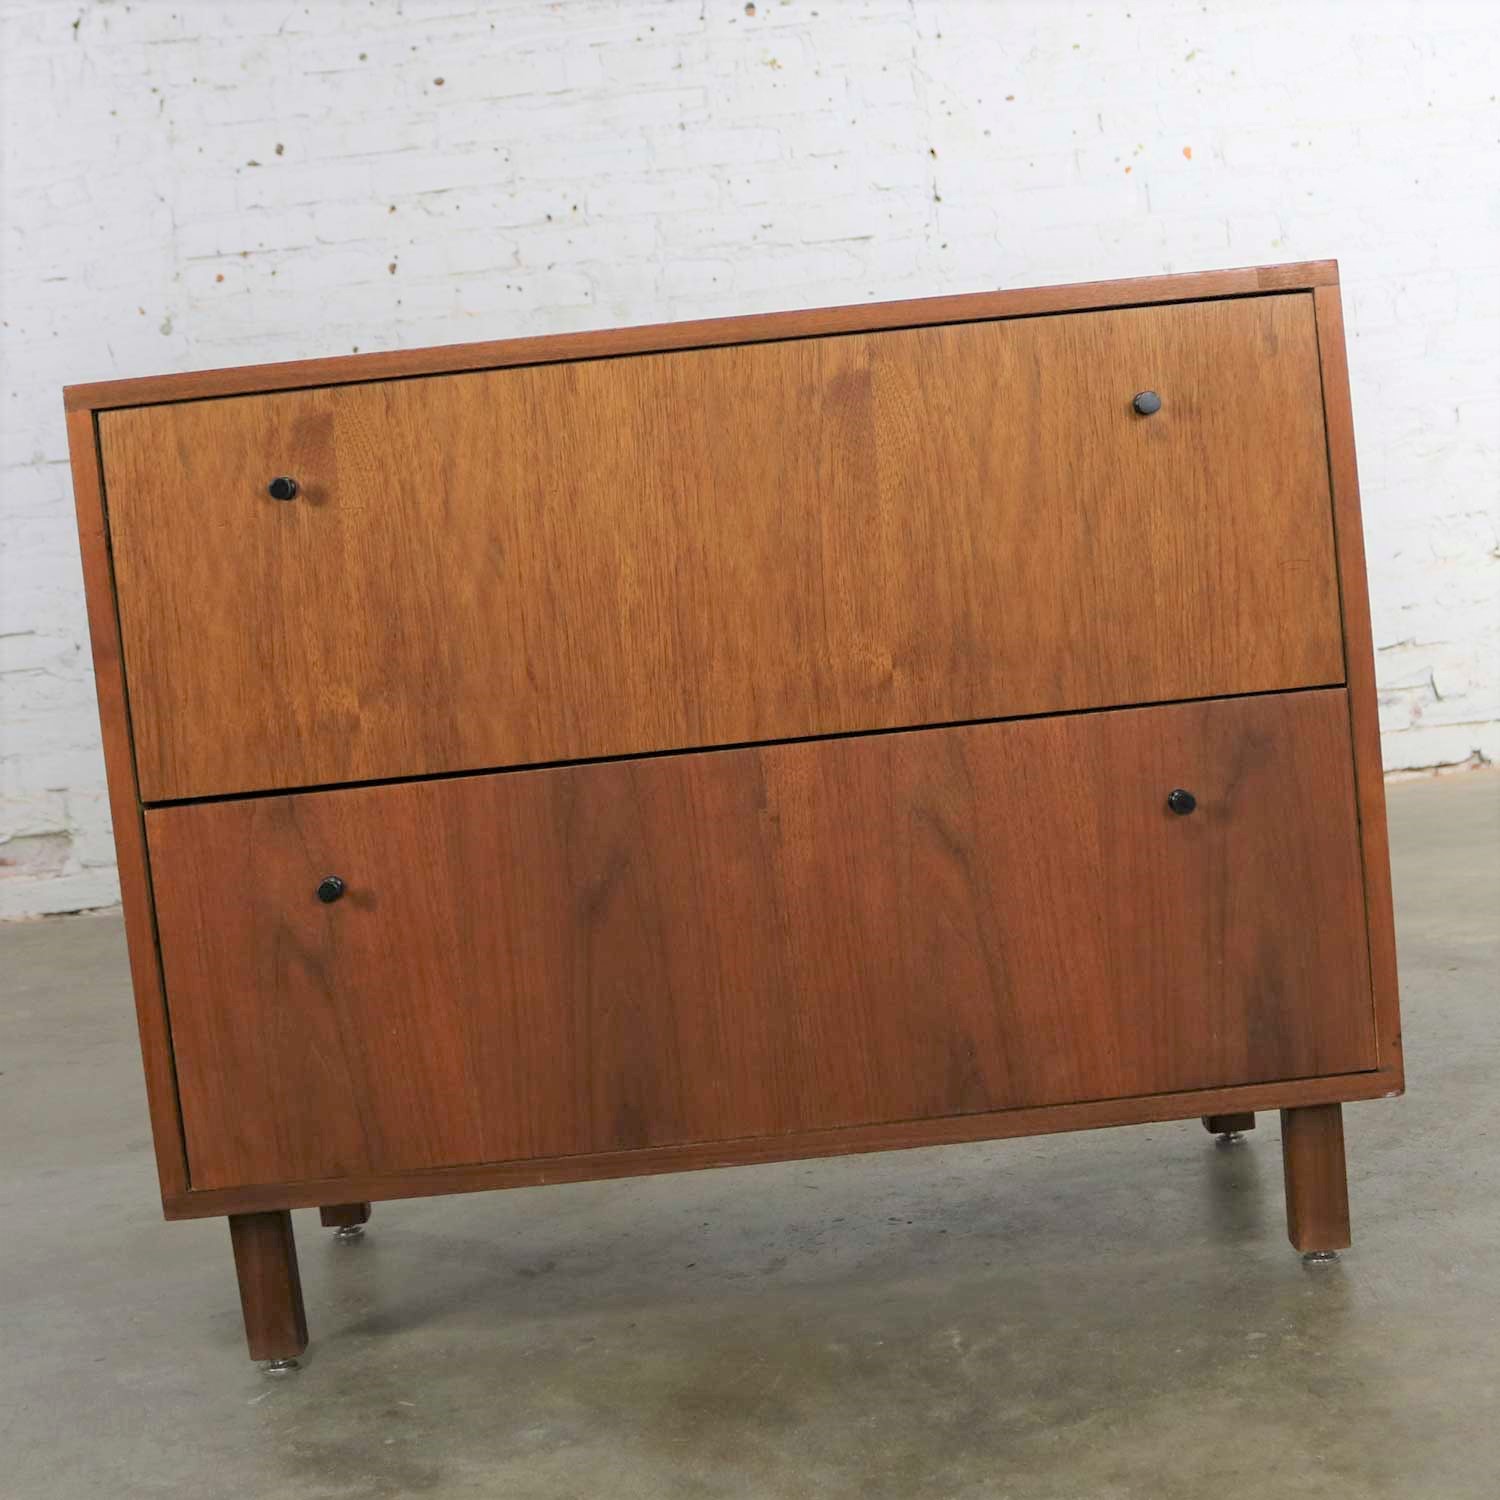 Mid Century Modern Two Drawer Lateral File Cabinet in Walnut by Hardwood House Inc.